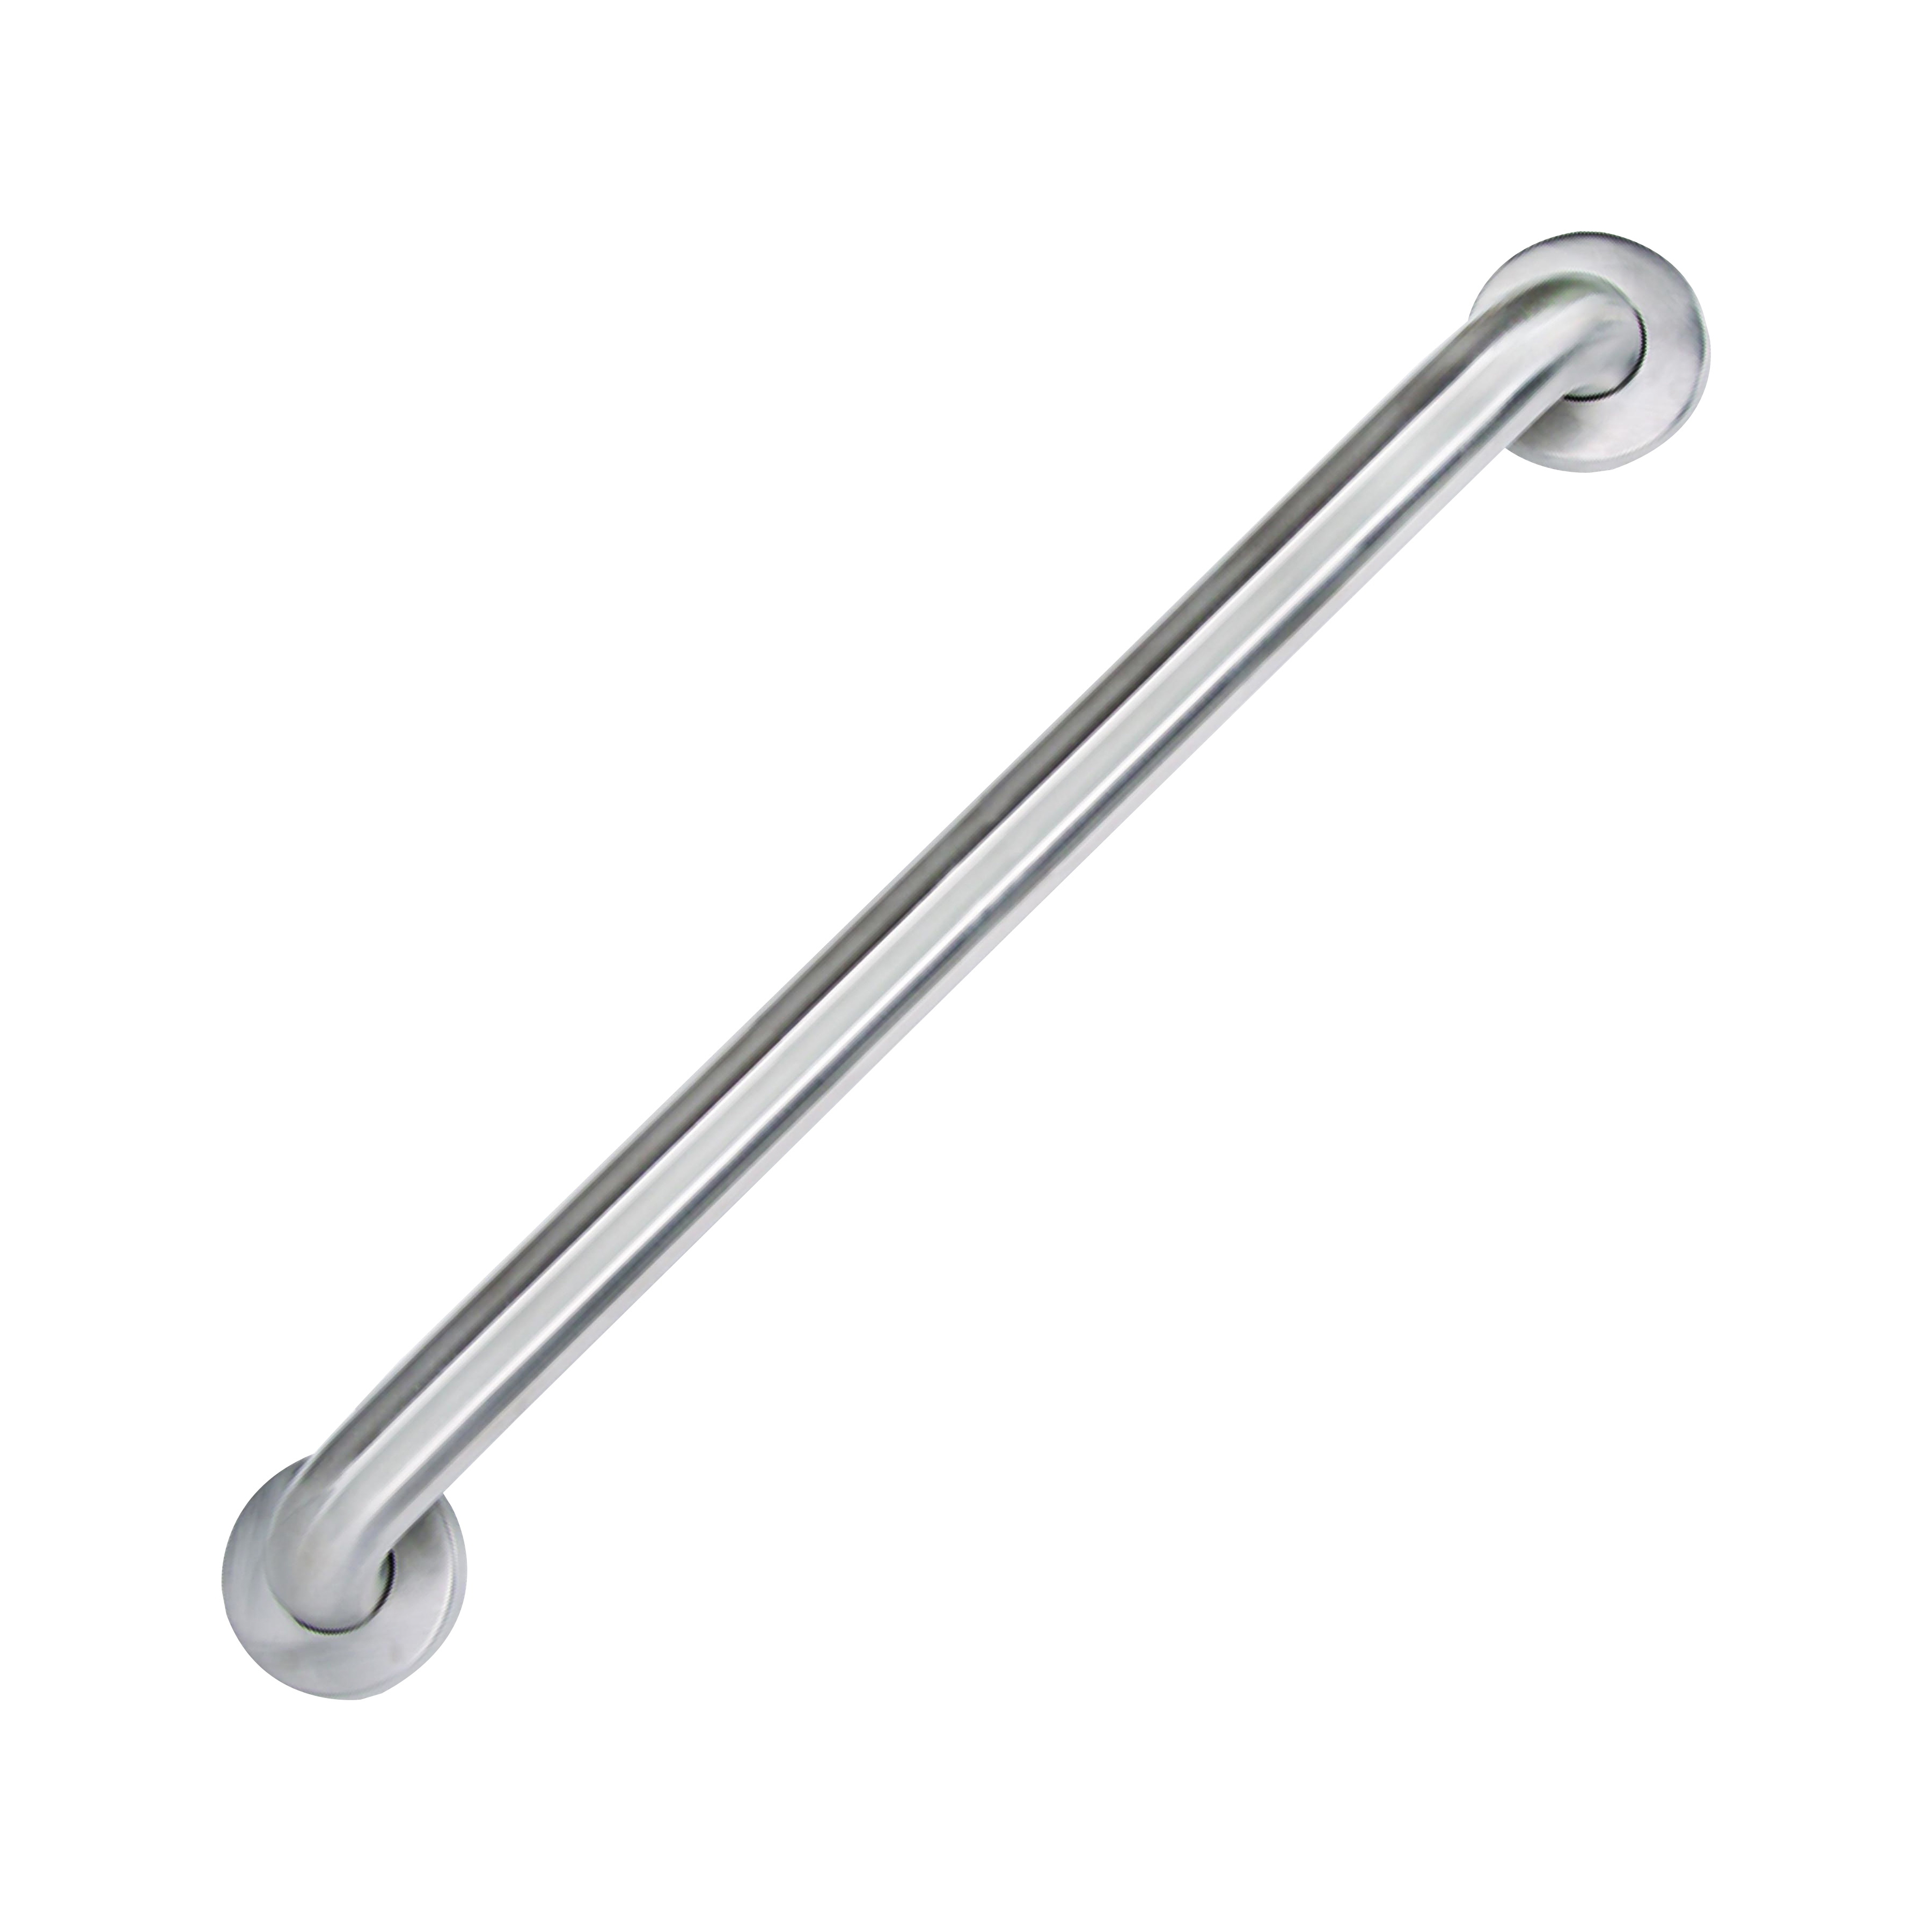 SG01-01&0124 Grab Bar, 24 in L Bar, Stainless Steel, Wall Mounted Mounting